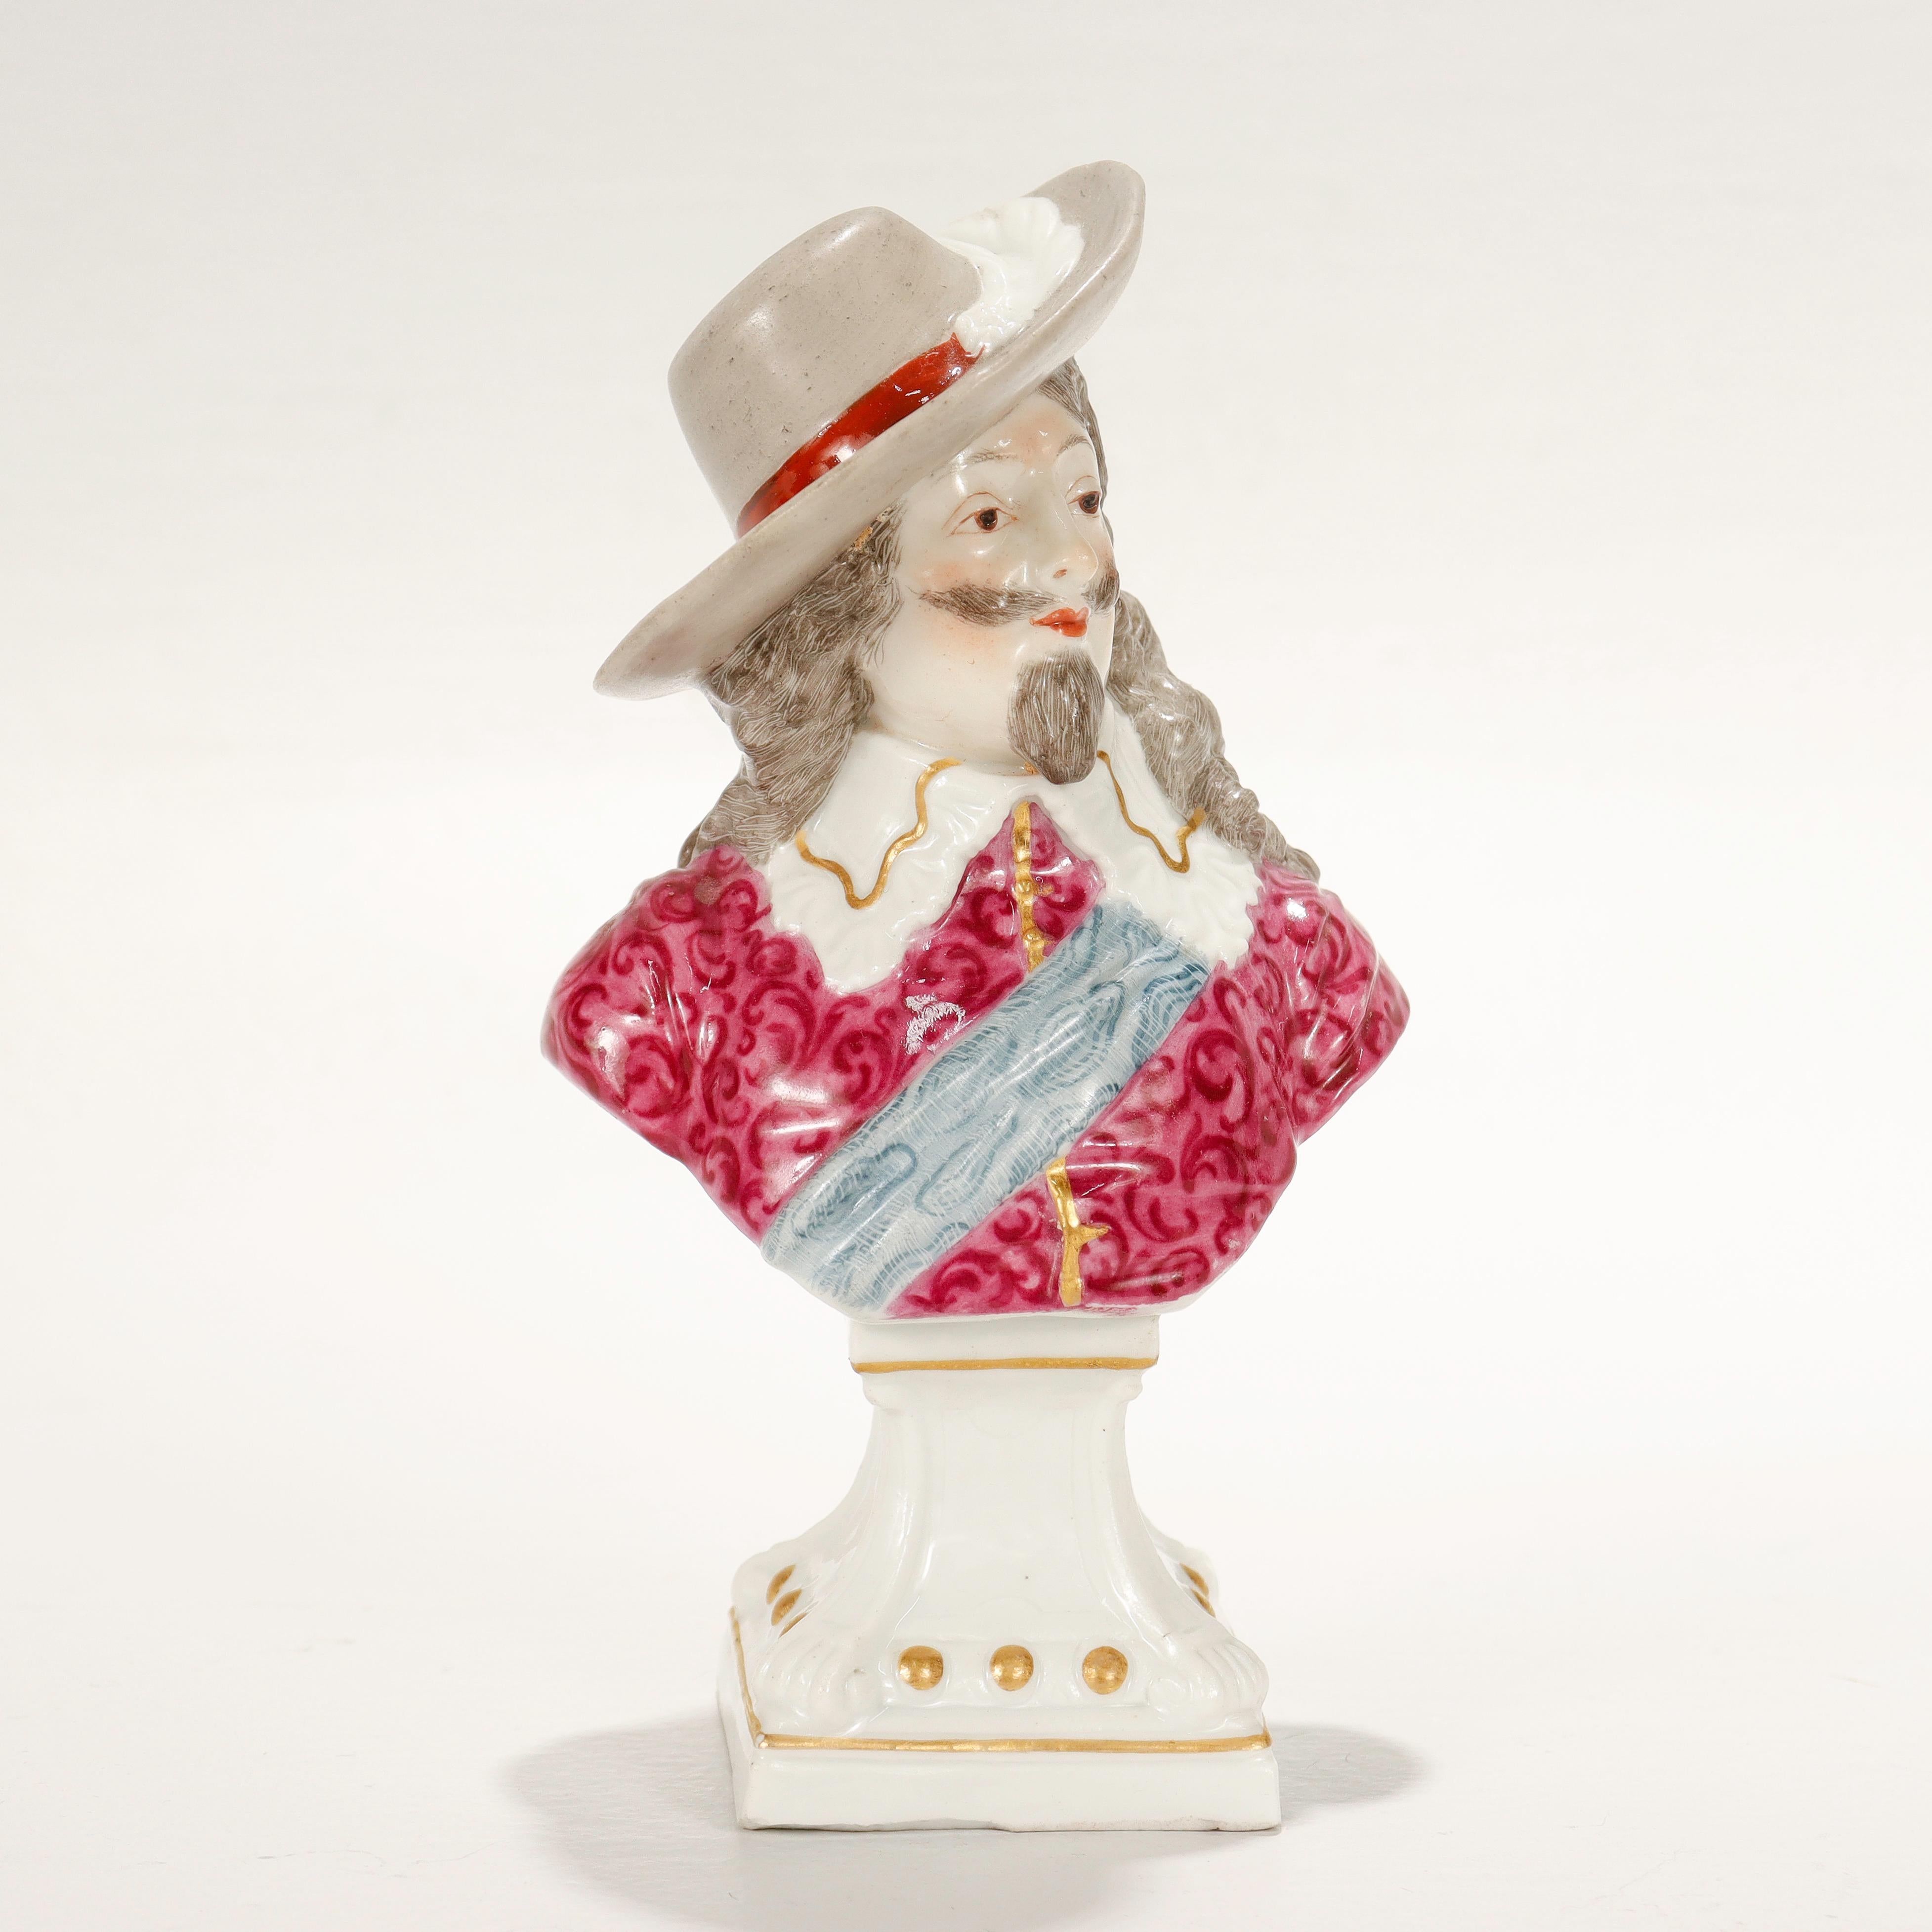 Antique Samson Porcelain Figurine of a Nobleman or Prince In Good Condition For Sale In Philadelphia, PA